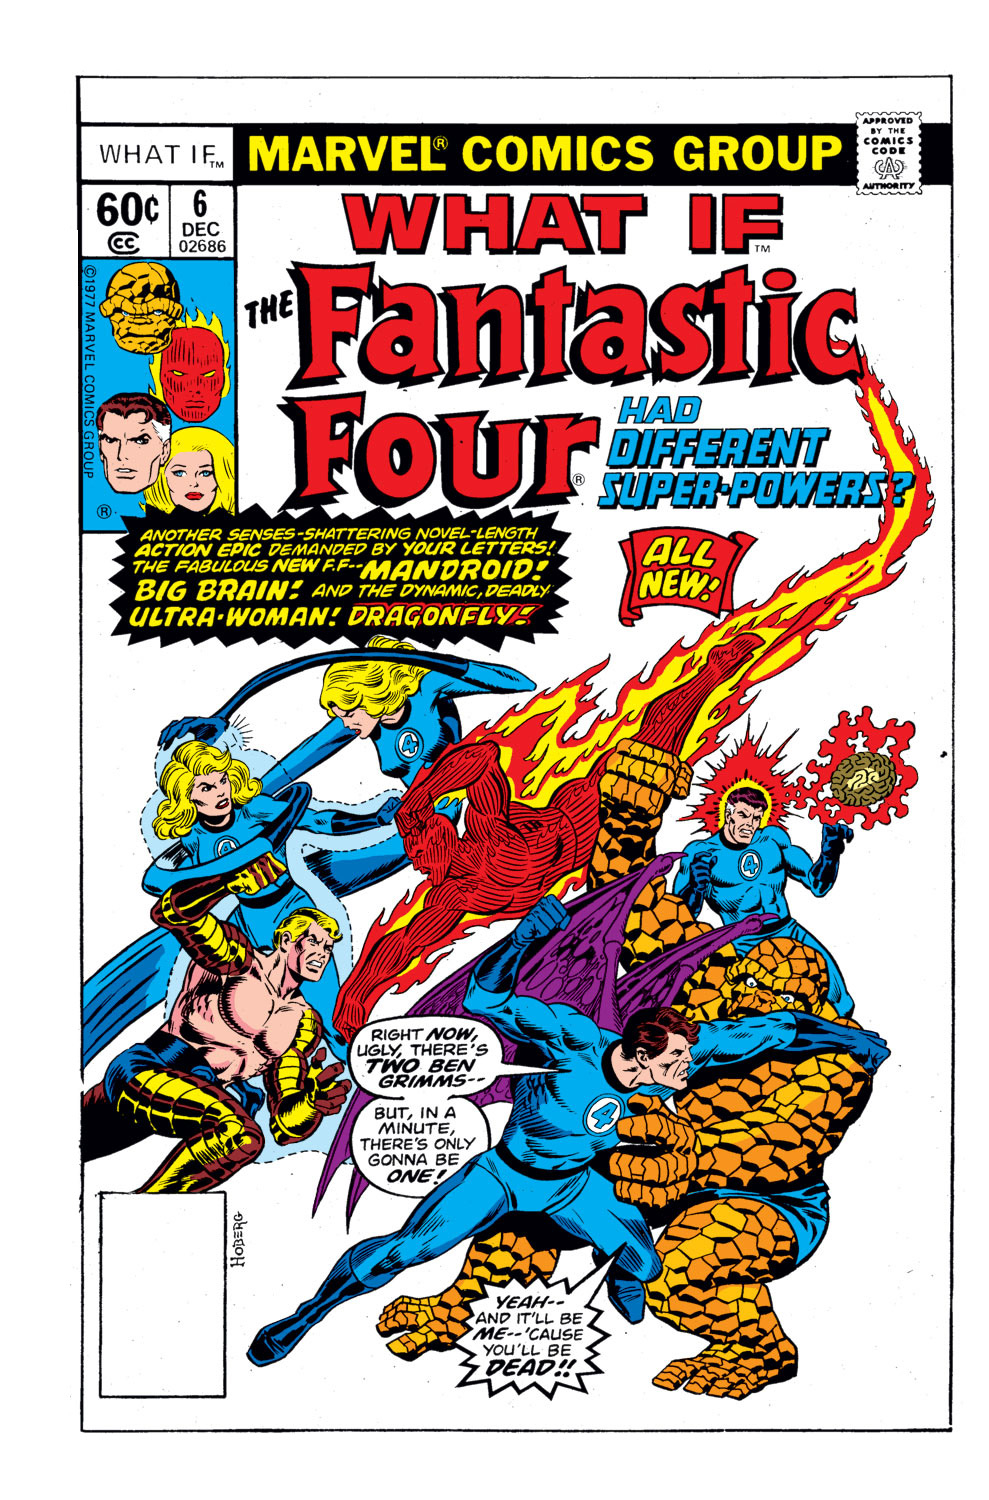 Read online What If? (1977) comic -  Issue #6 - The Fantastic Four had different superpowers - 1